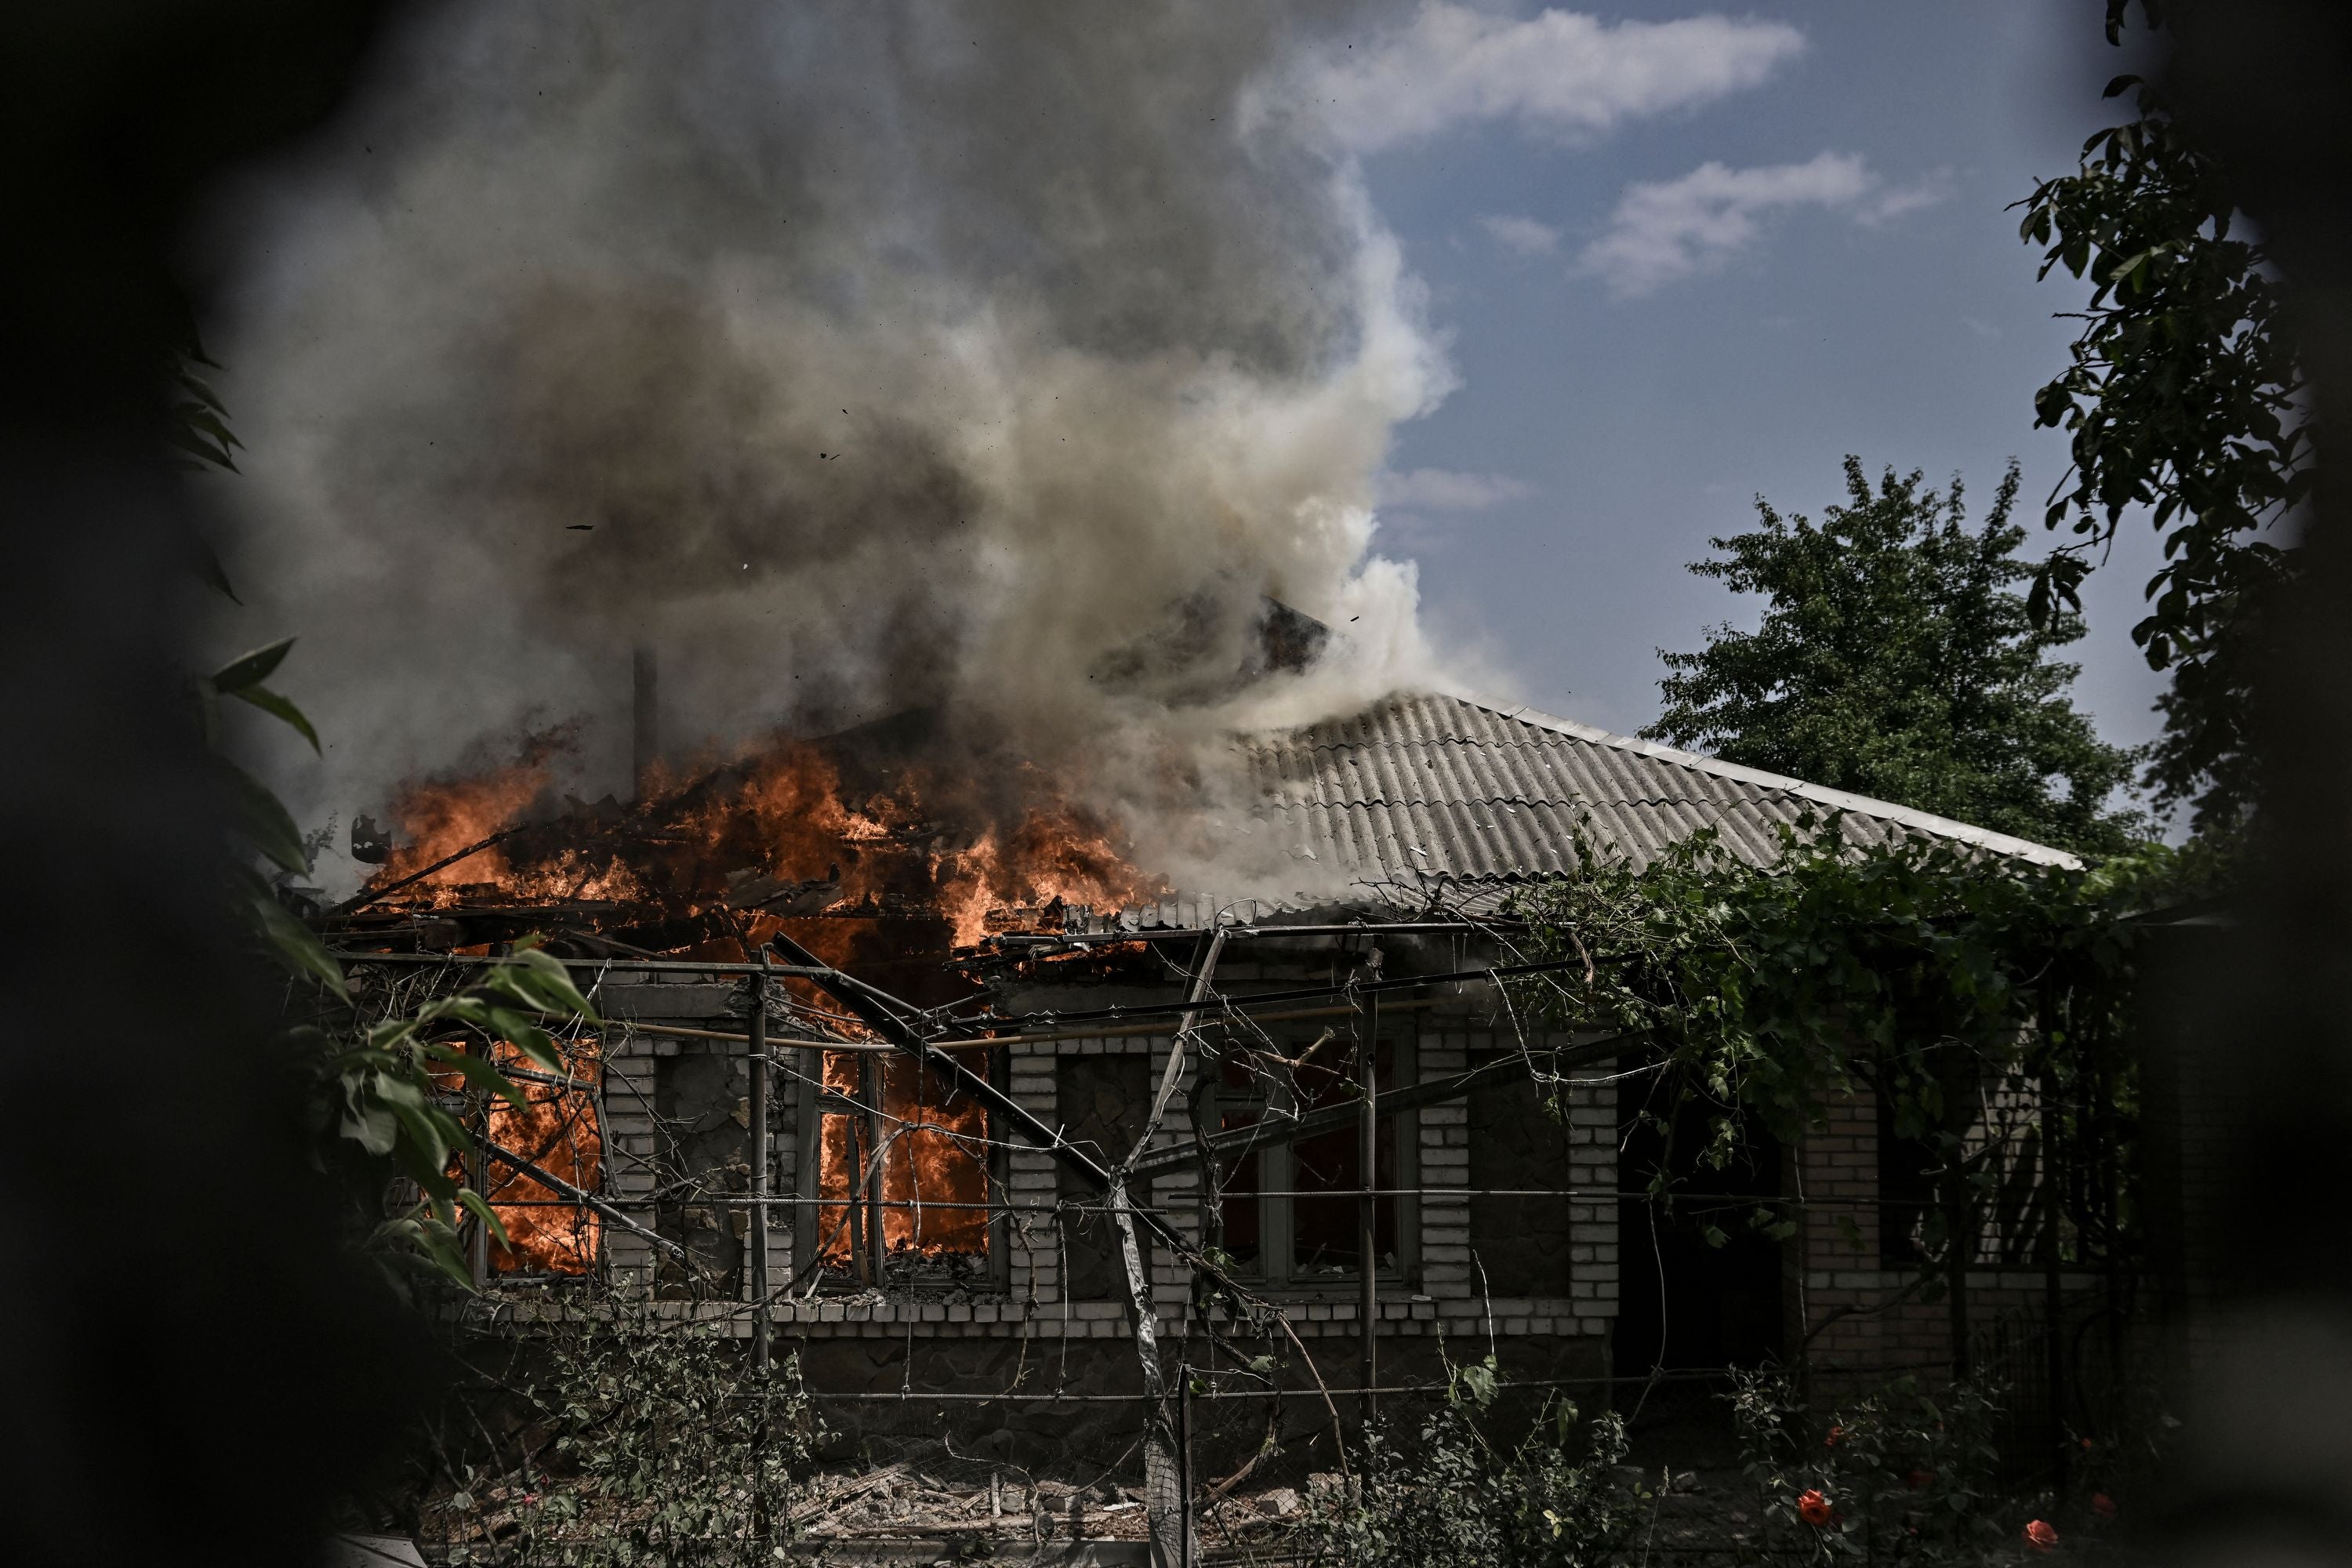 A house burns after being shelled during an artillery duel between Ukrainian and Russian troops in Lysychansk on Saturday